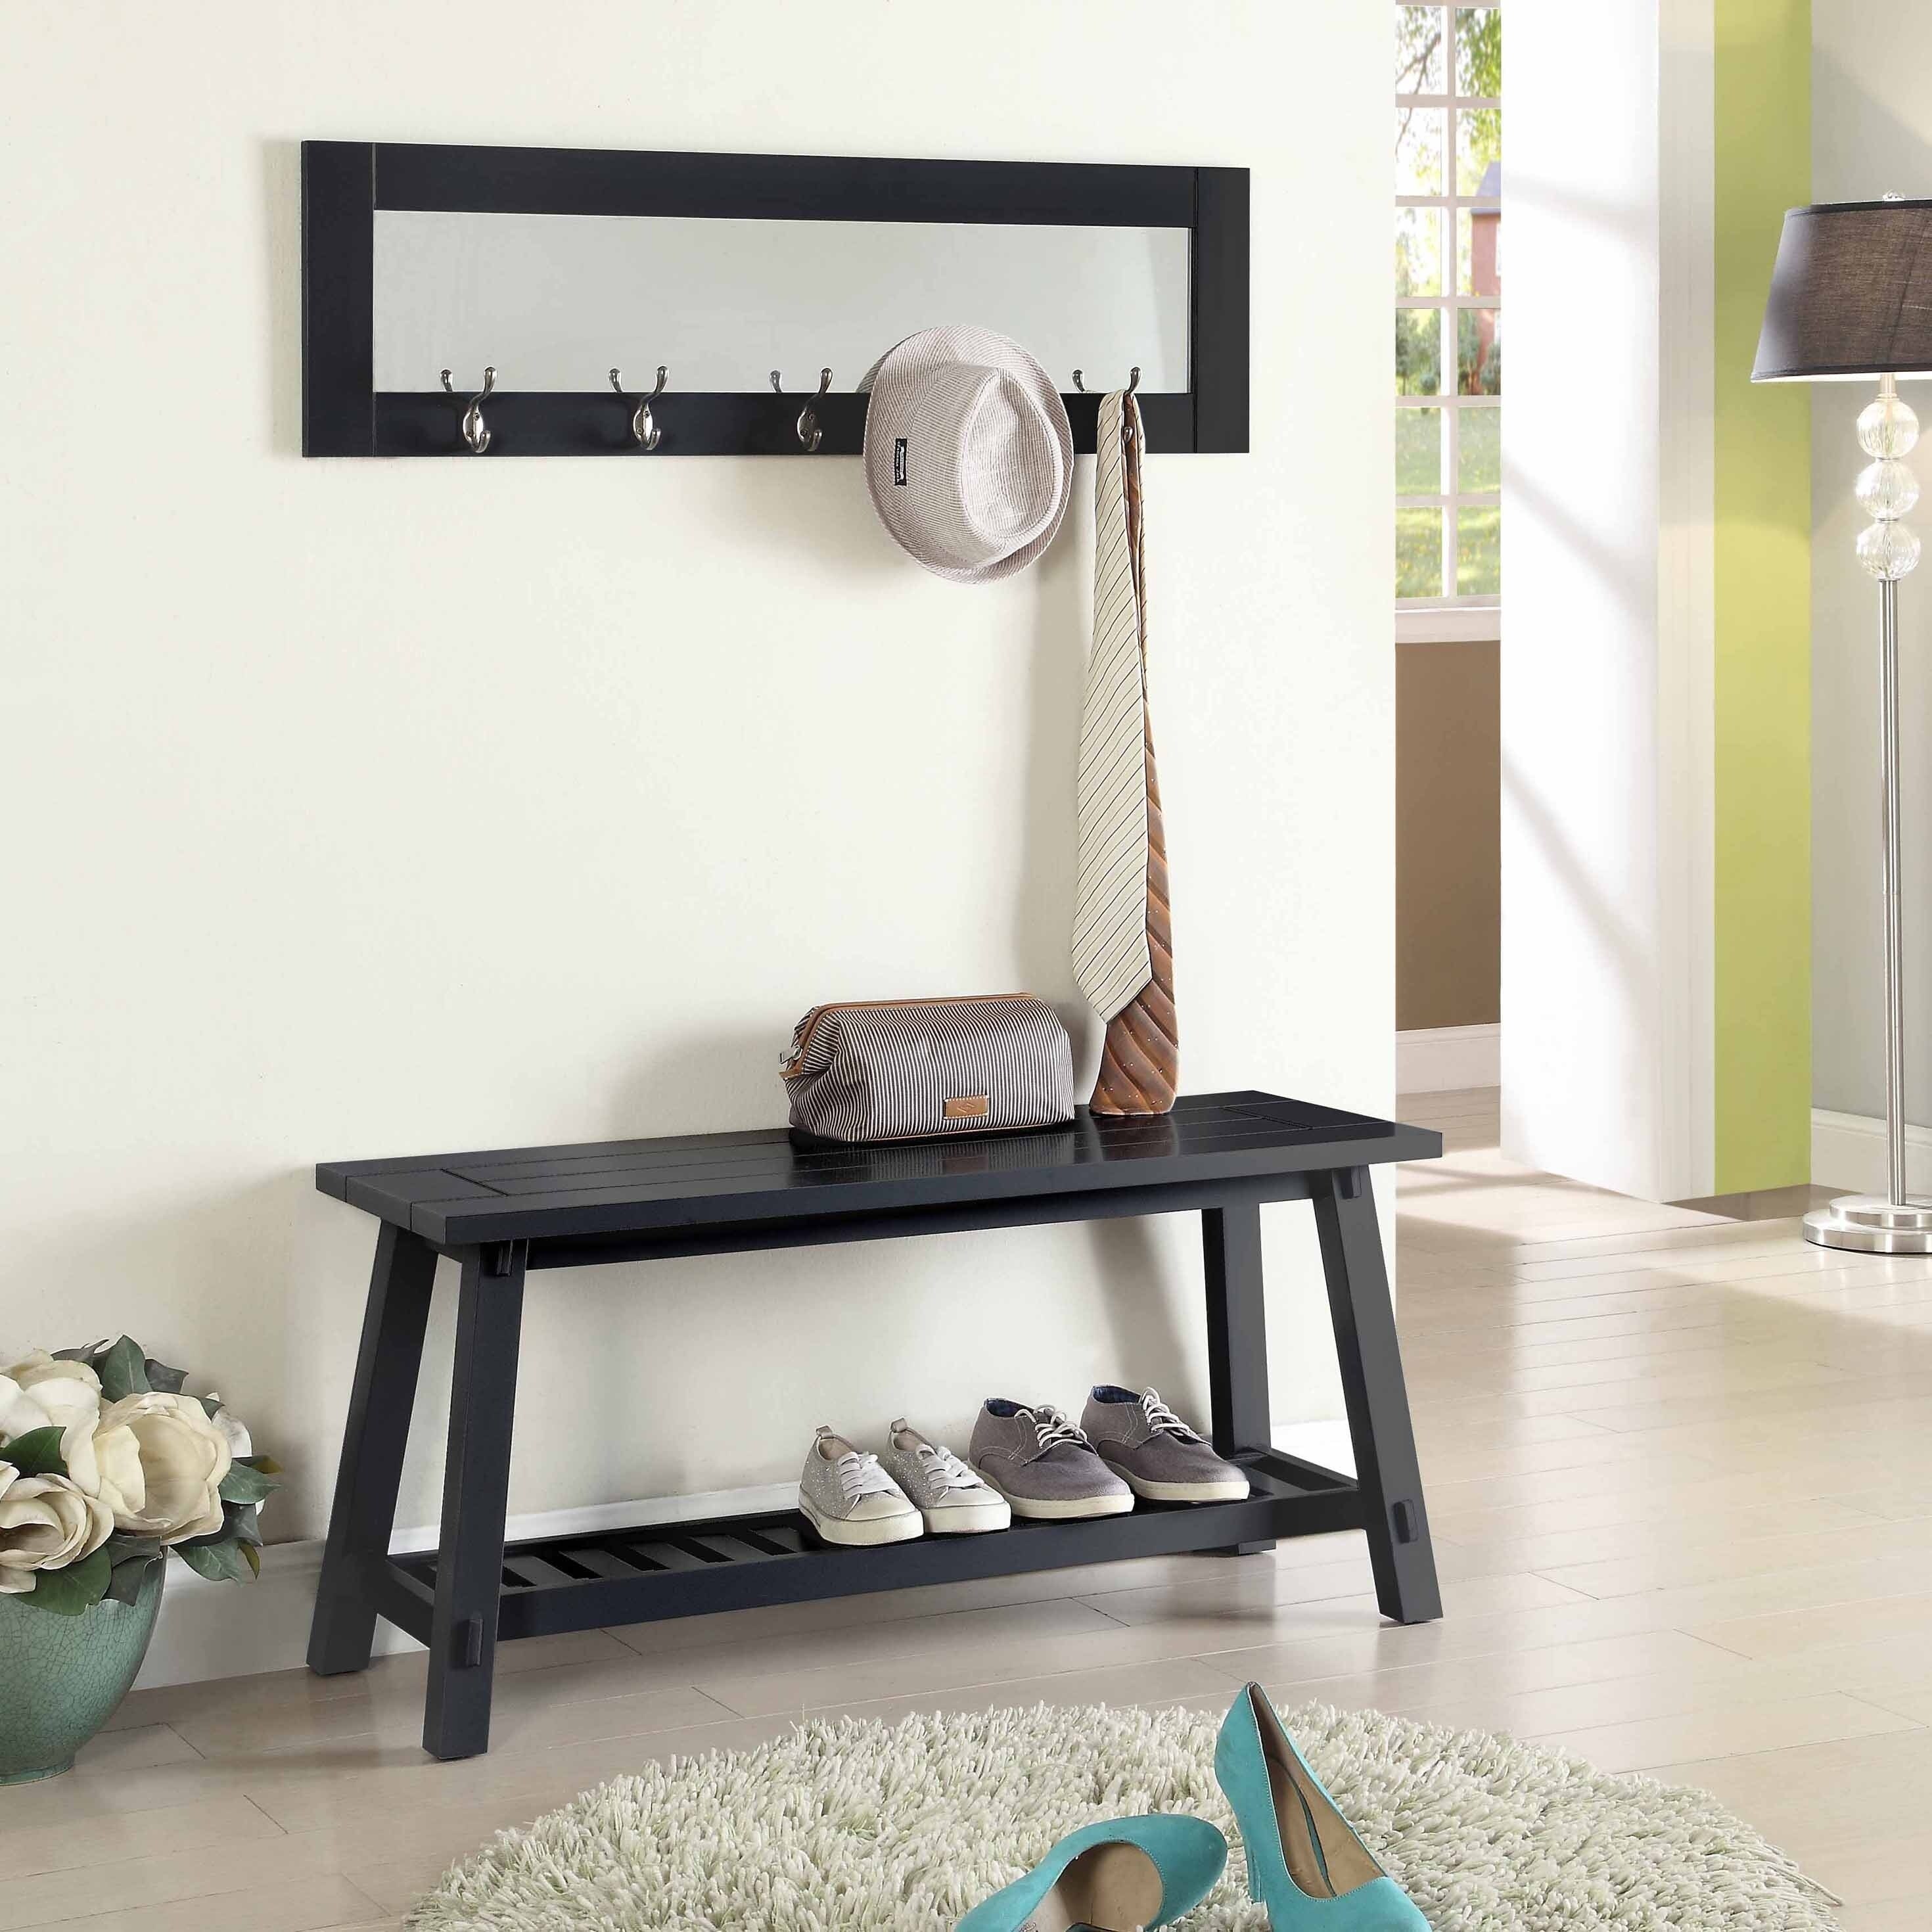 Shop Black Painted Wood Bench With Matching Mirror And Coat Hooks